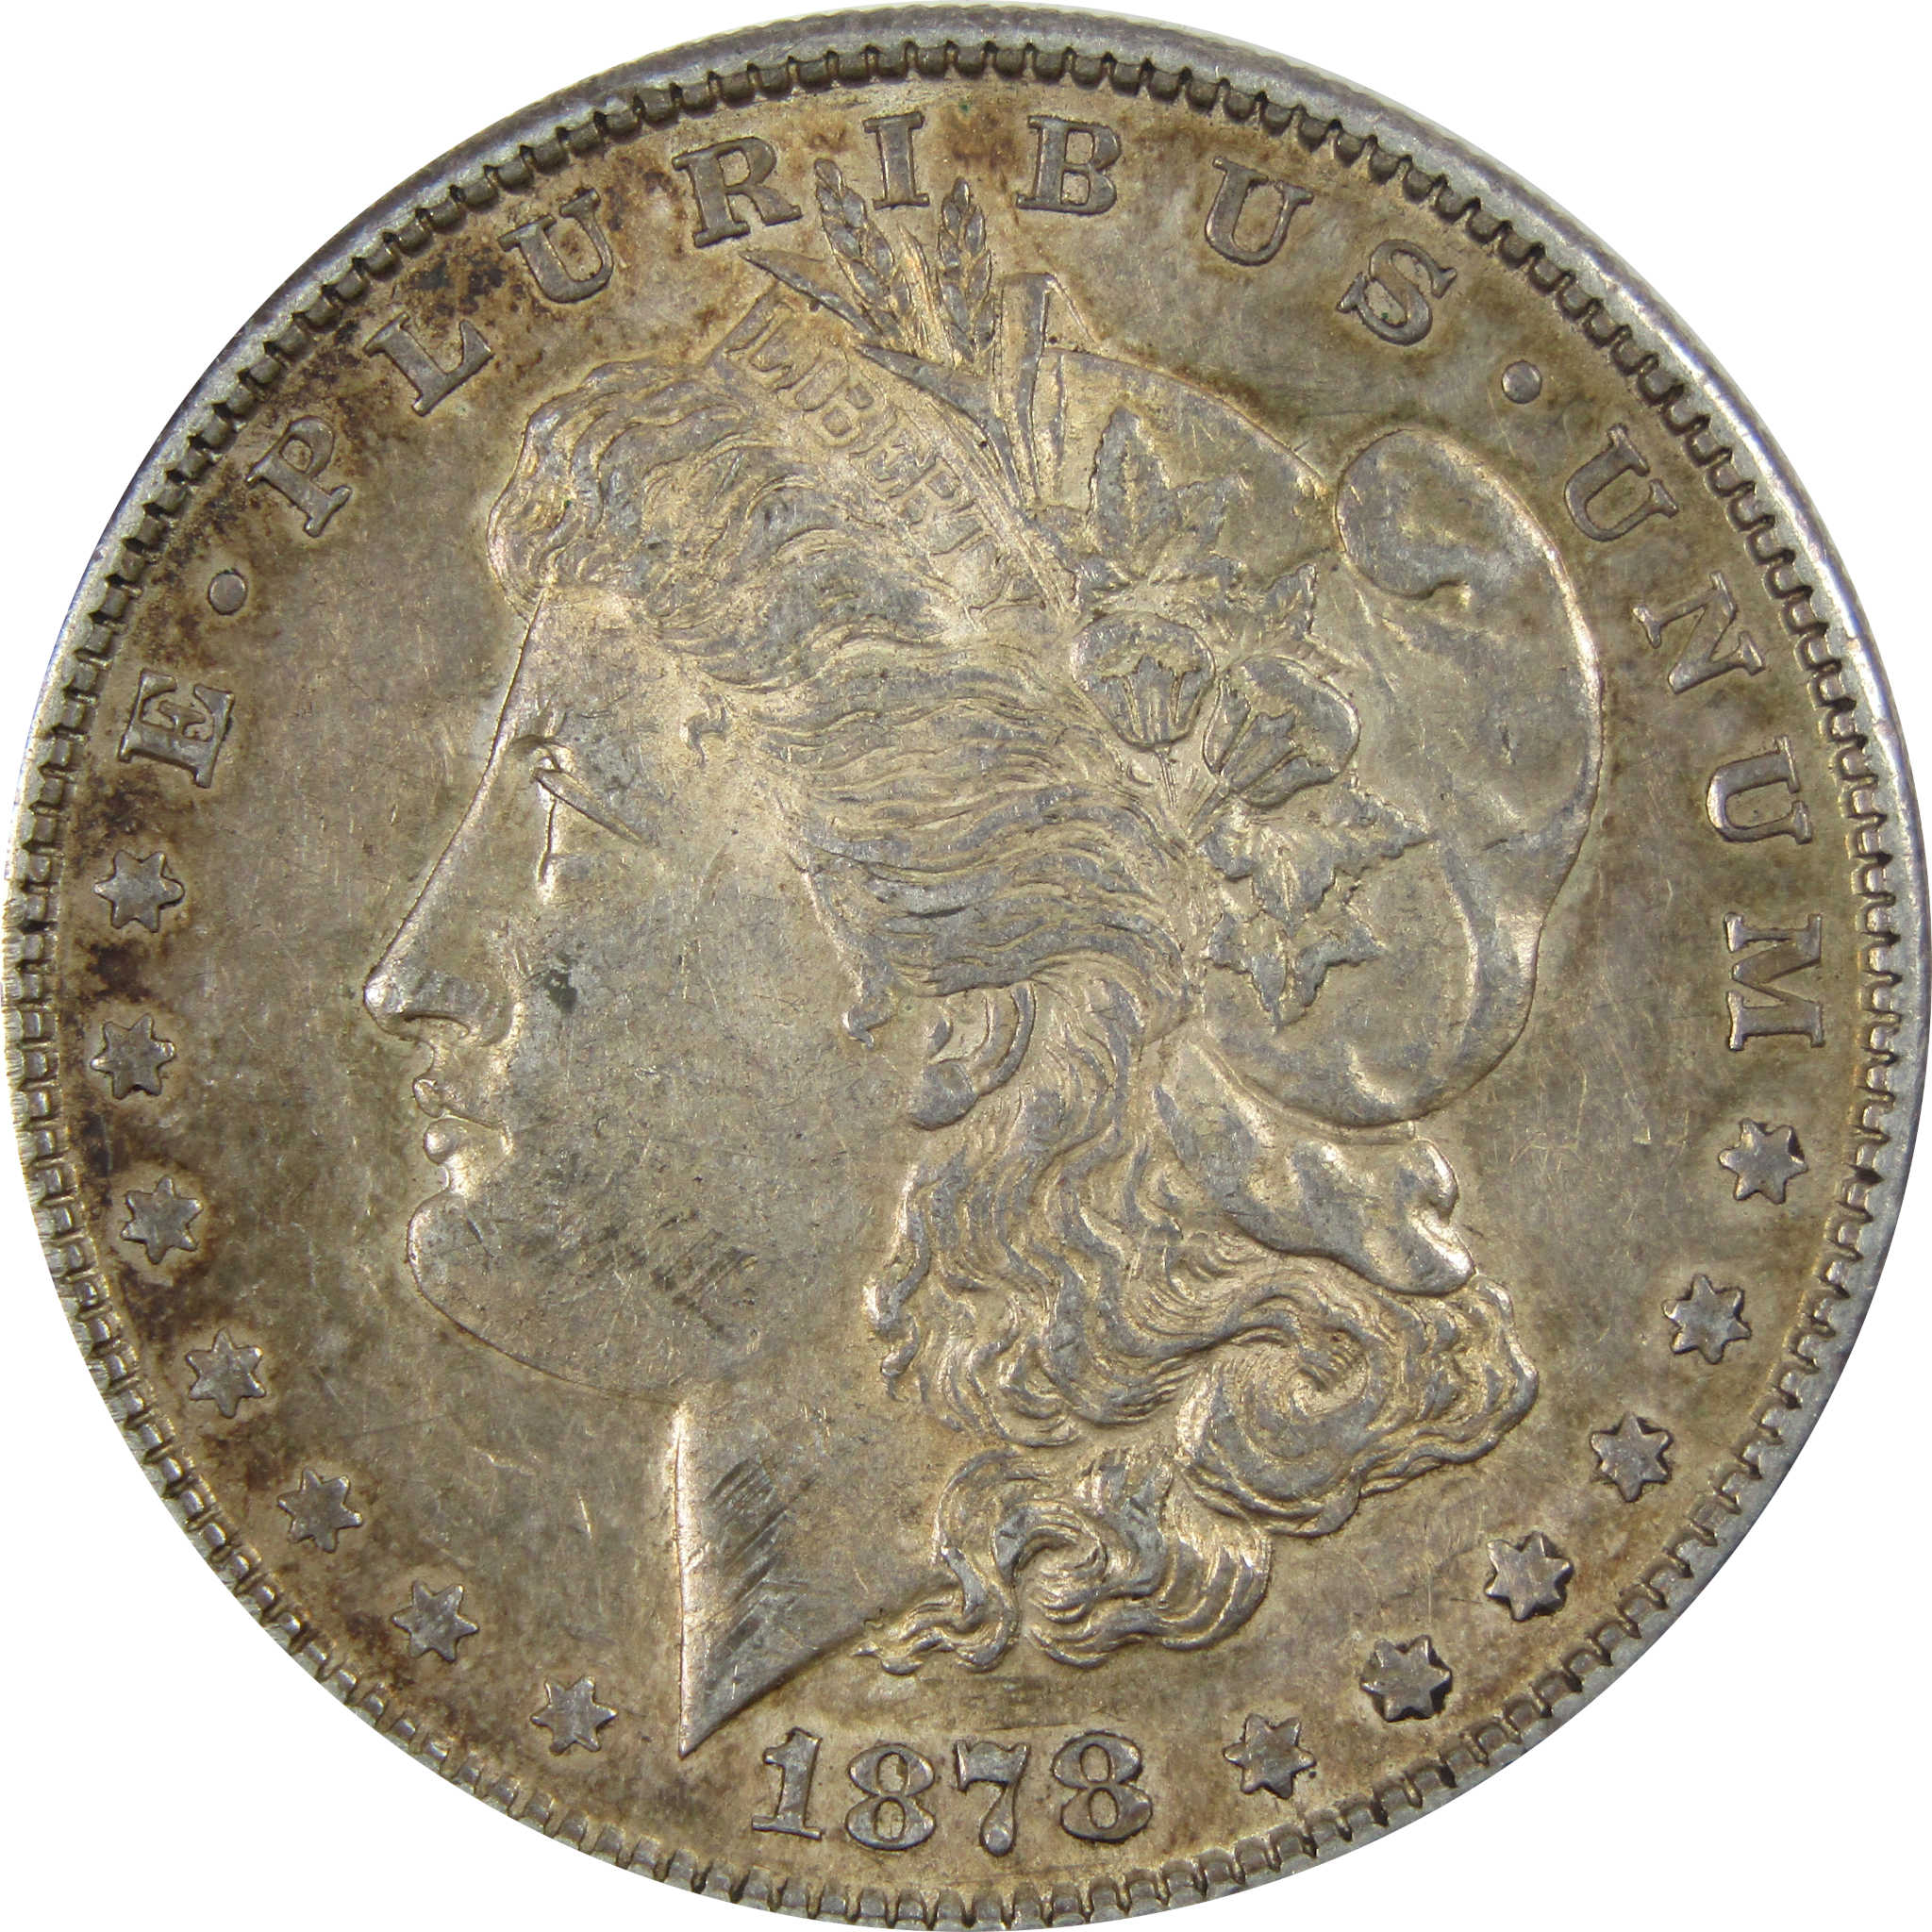 1878 S Morgan Dollar XF EF Extremely Fine 90% Silver $1 Coin SKU:I7020 - Morgan coin - Morgan silver dollar - Morgan silver dollar for sale - Profile Coins &amp; Collectibles